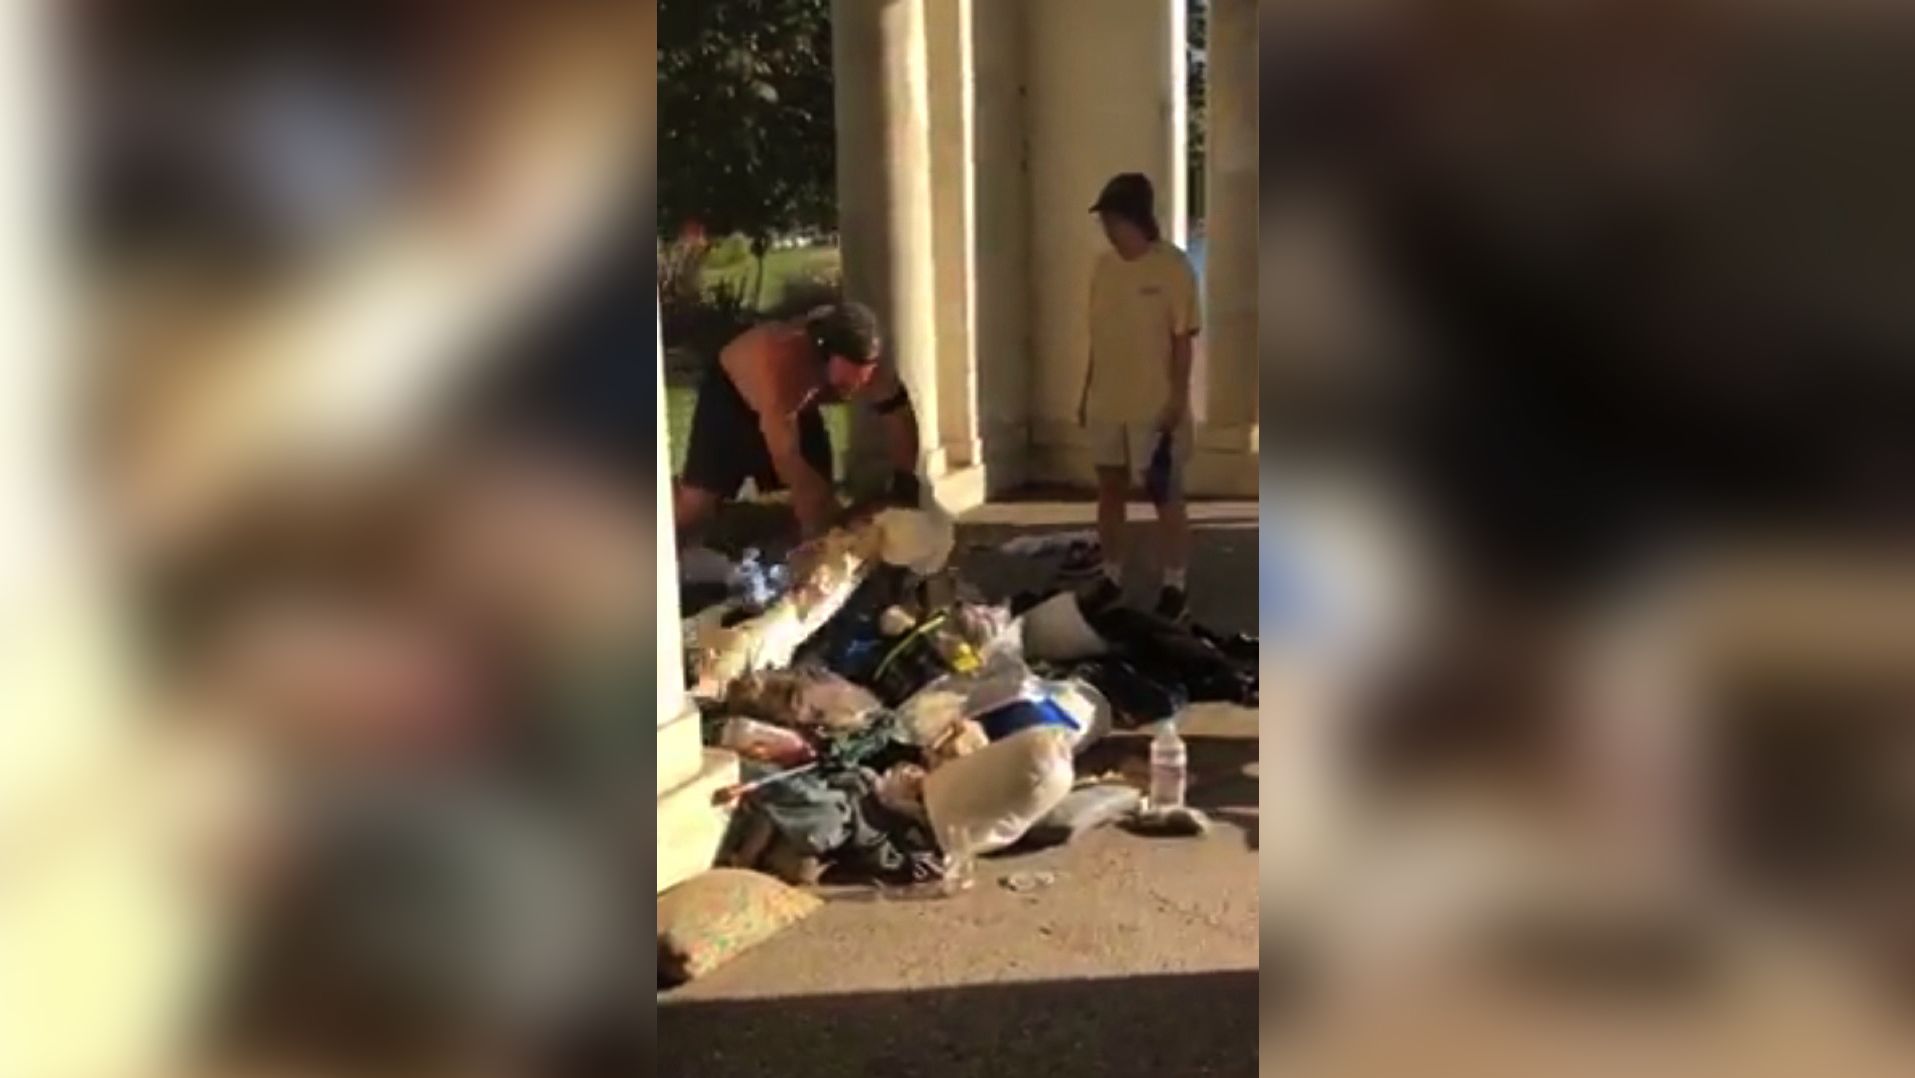 A  jogger gathers a homeless man's possessions in his arms before throwing them into a trash can